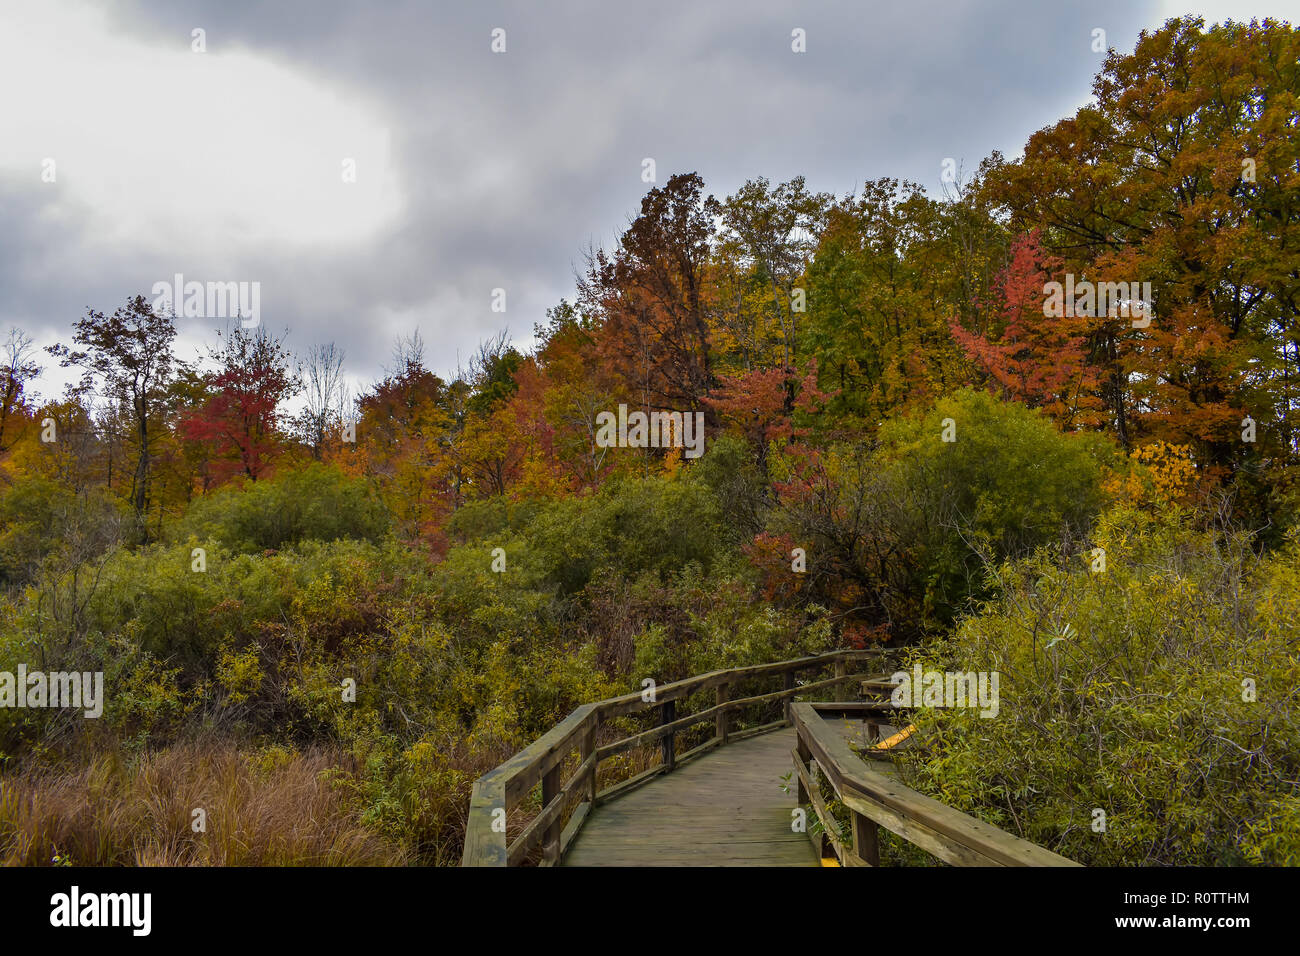 Boardwalk in autumn, Huron Nature Center, Midwest, Michigan. The Fall colors were amazing at this little park. Stock Photo